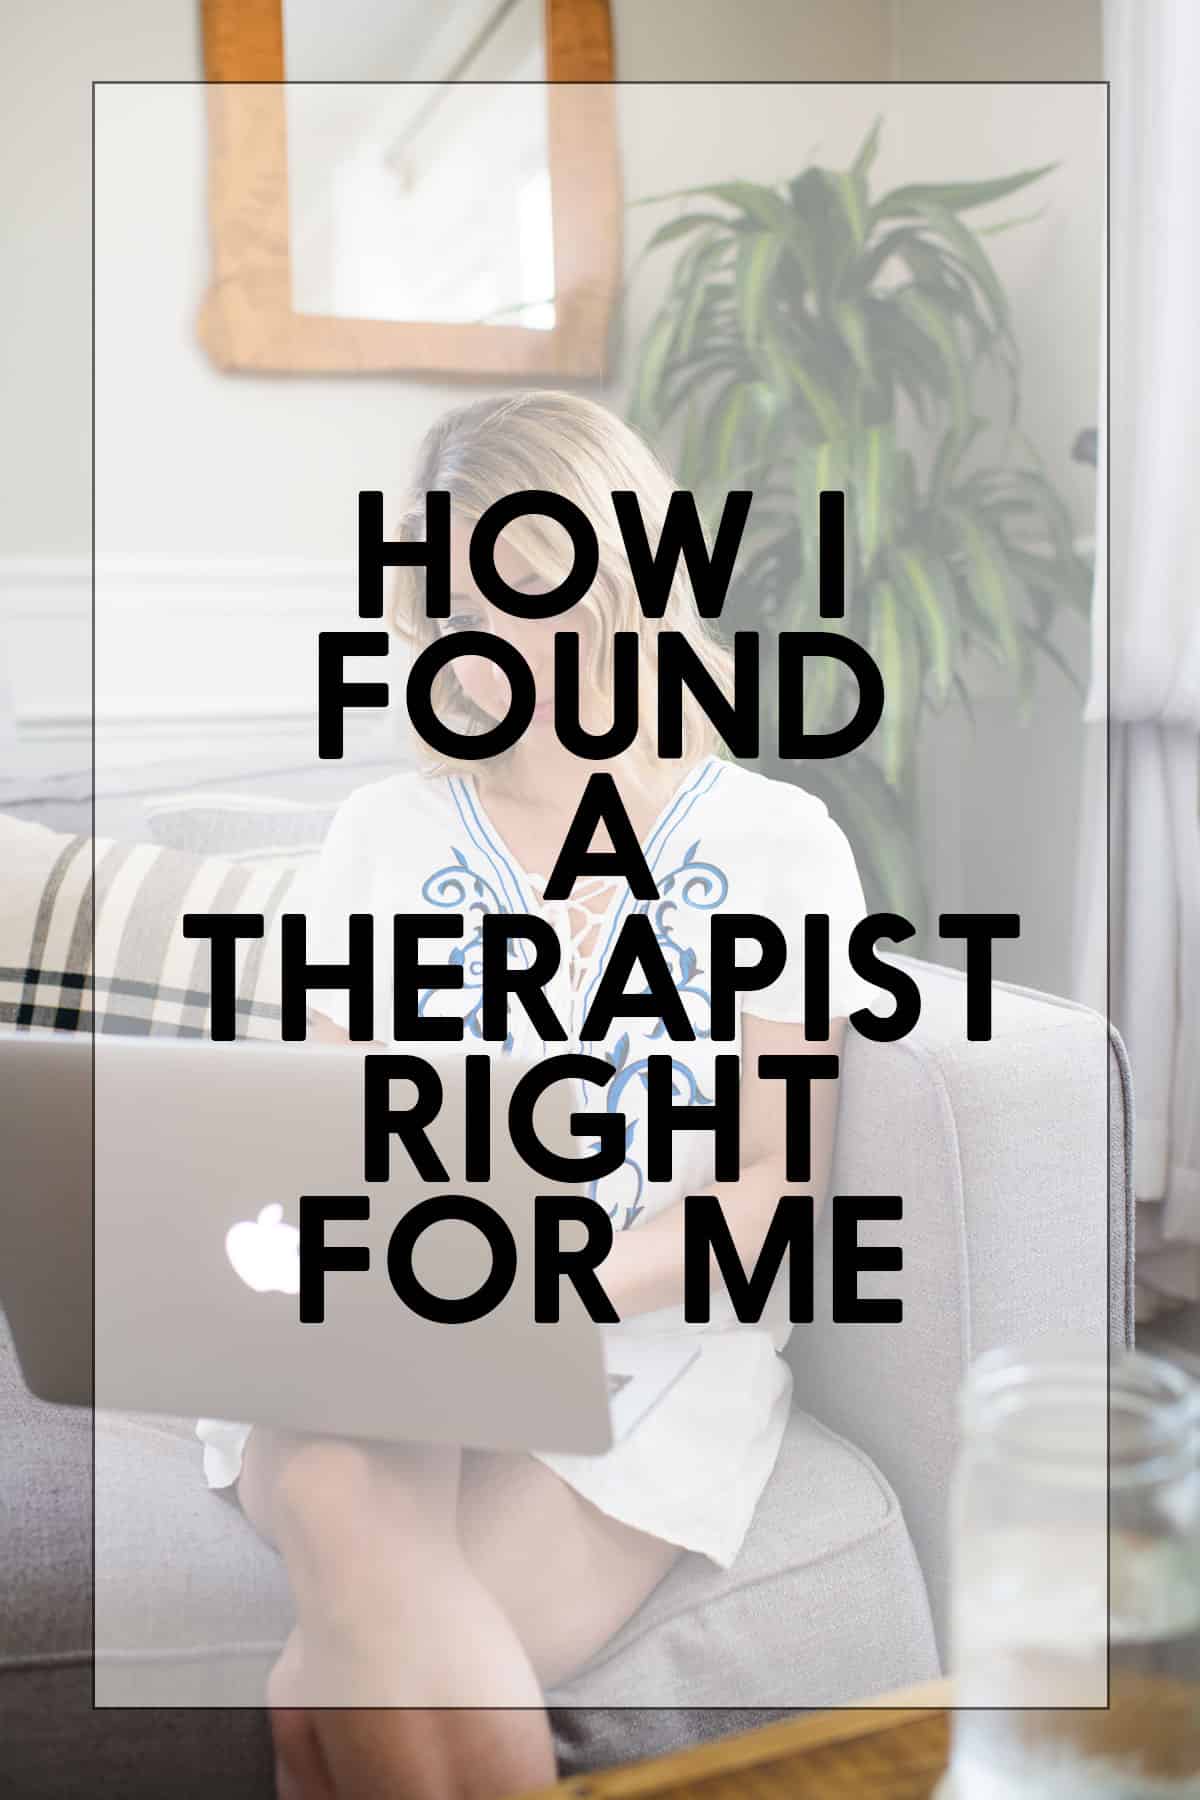 How to find a therapist online